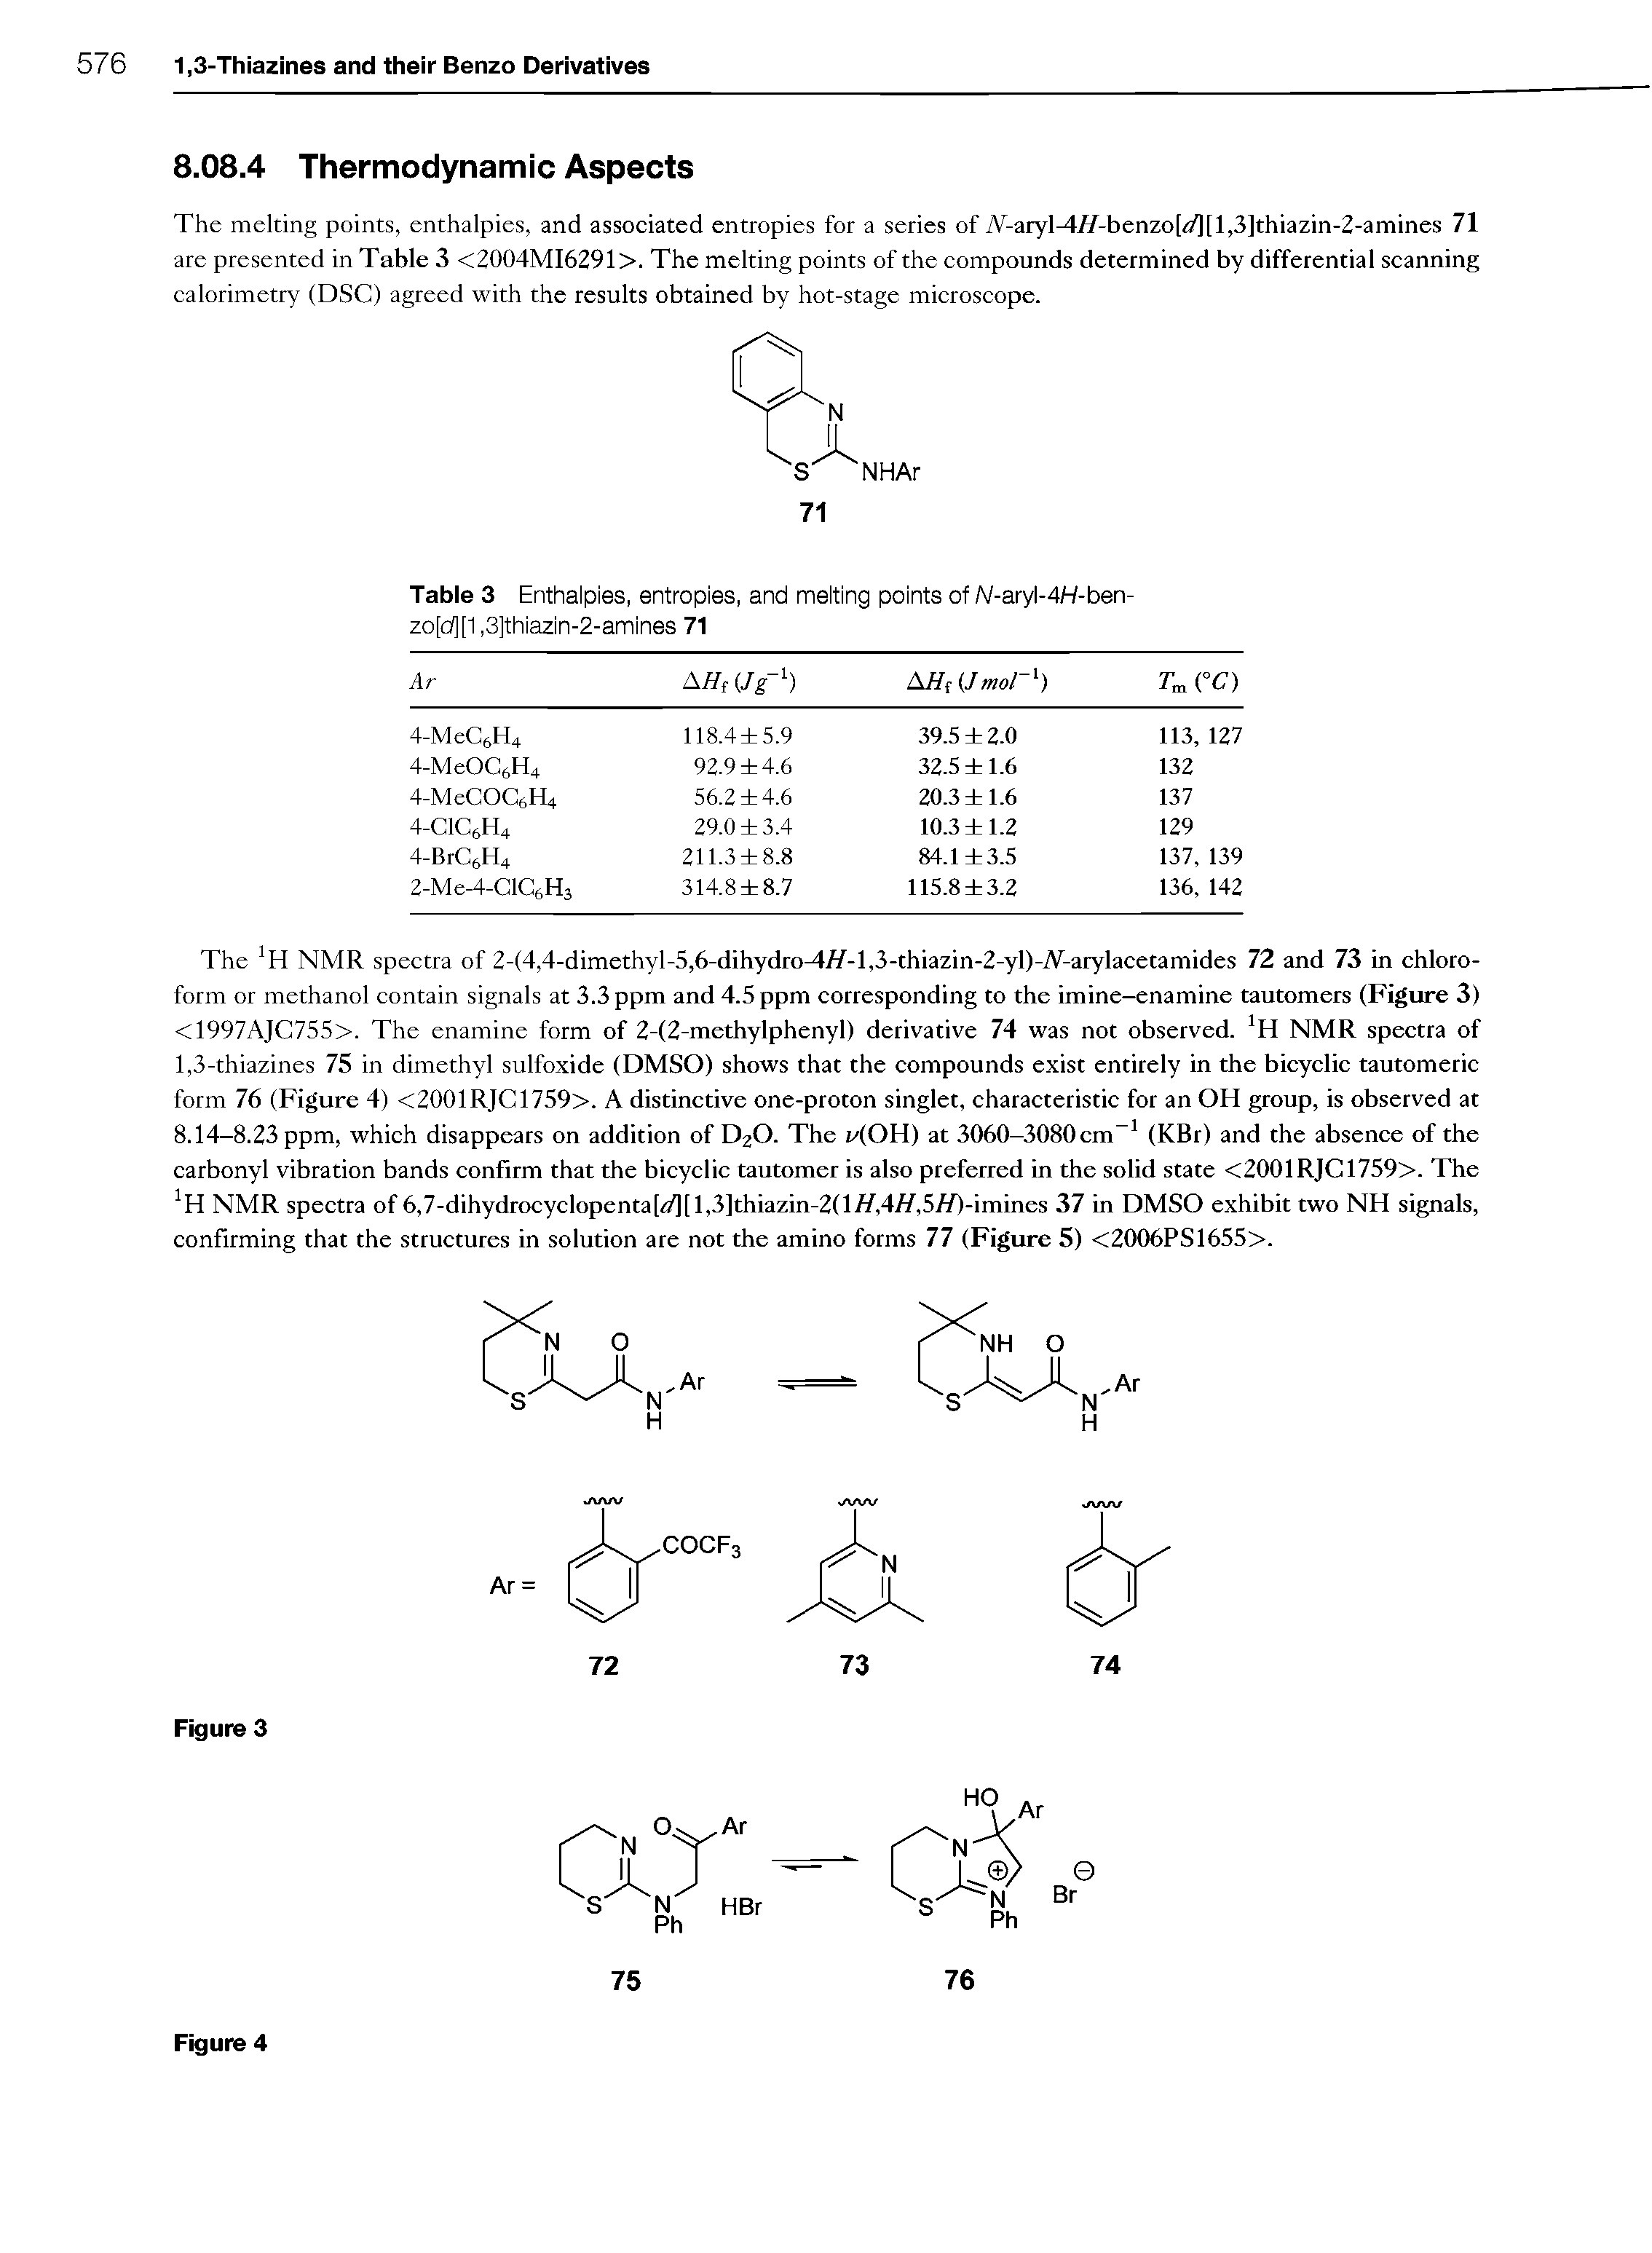 Table 3 Enthalpies, entropies, and melting points of A/-aryl-4H-ben-zo[t/][1,3]thiazin-2-amines 71...